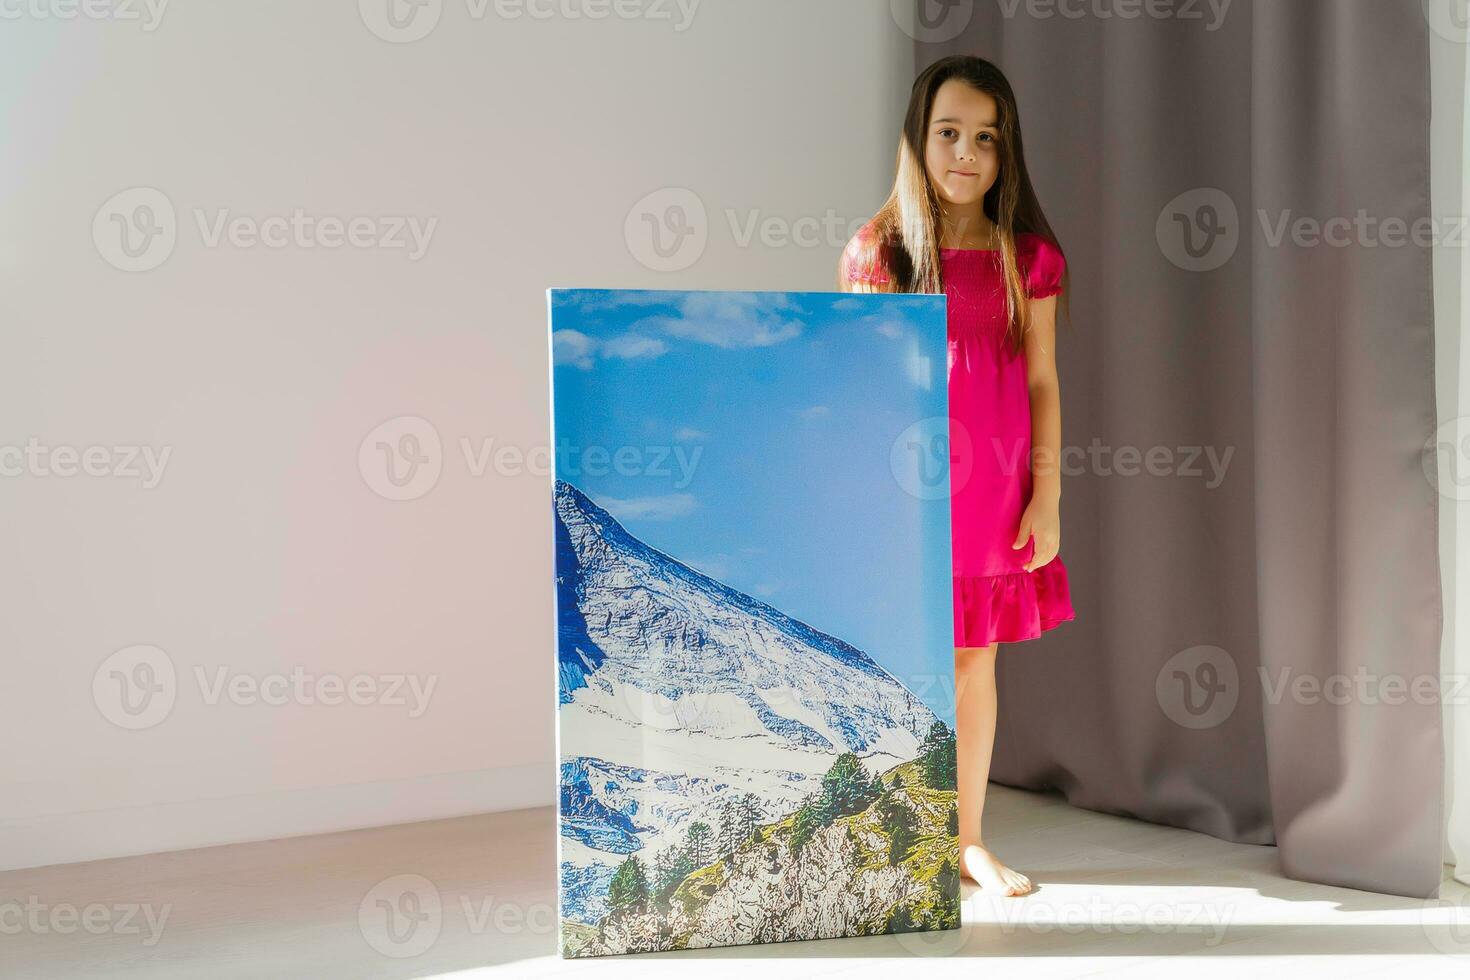 Cute little girl holding photo canvas at home